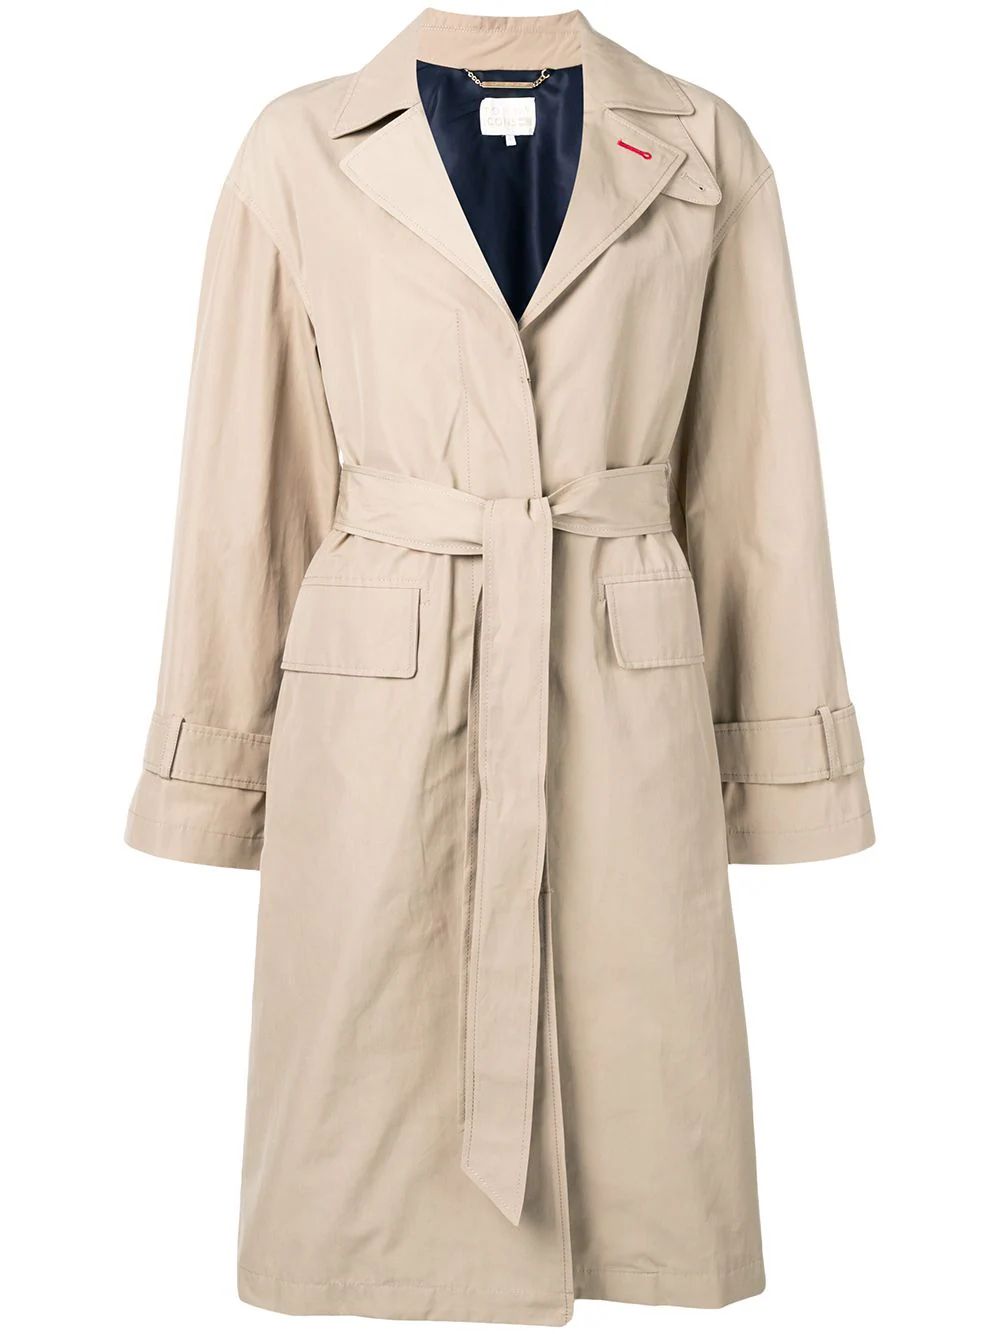 Tommy Hilfiger classic trench coat - Neutrals | FarFetch Global